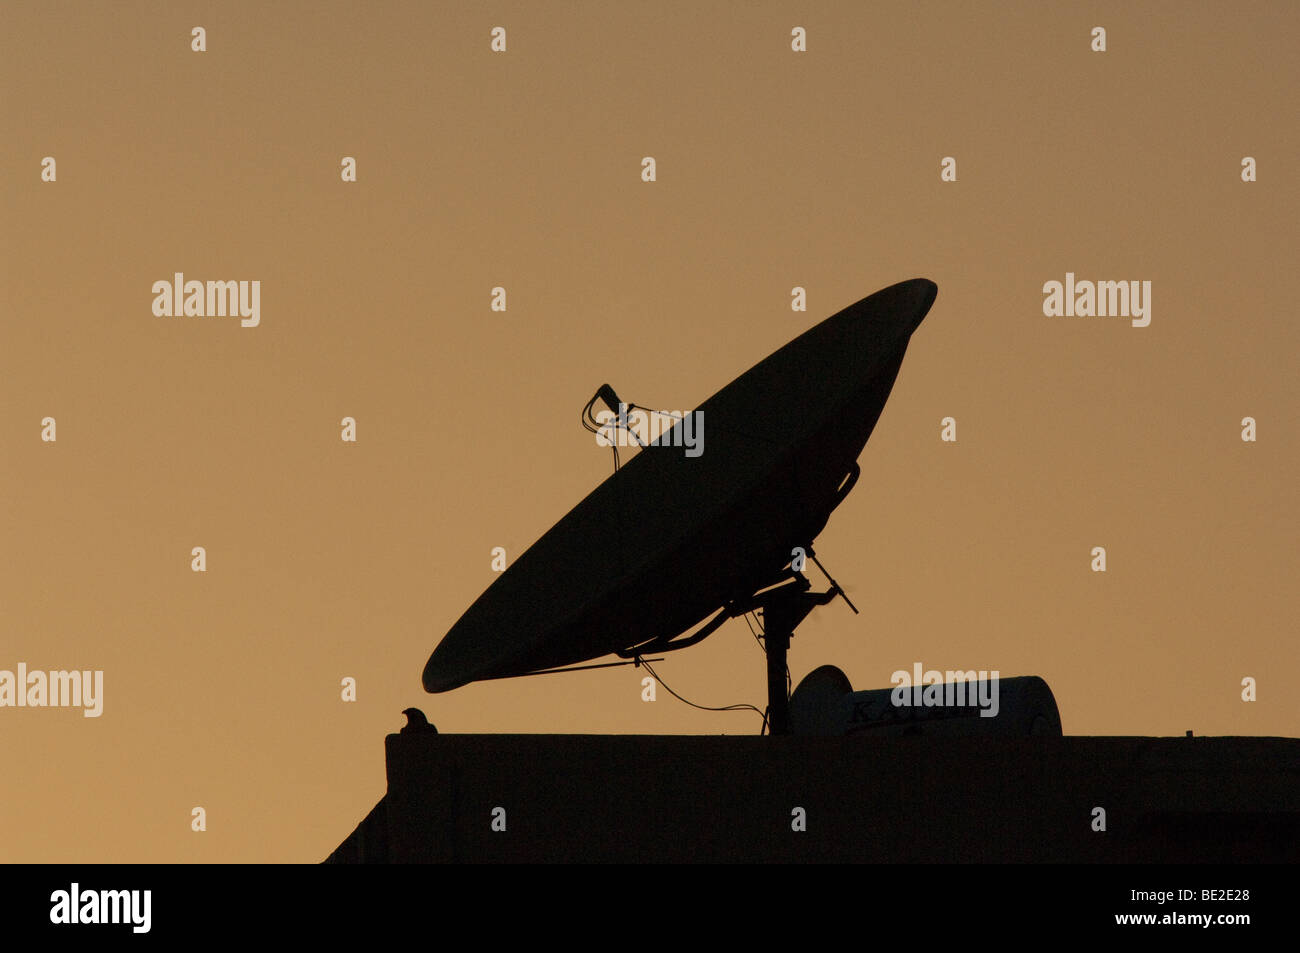 Satellite receiver dish in silhouette against an evening sky. Stock Photo